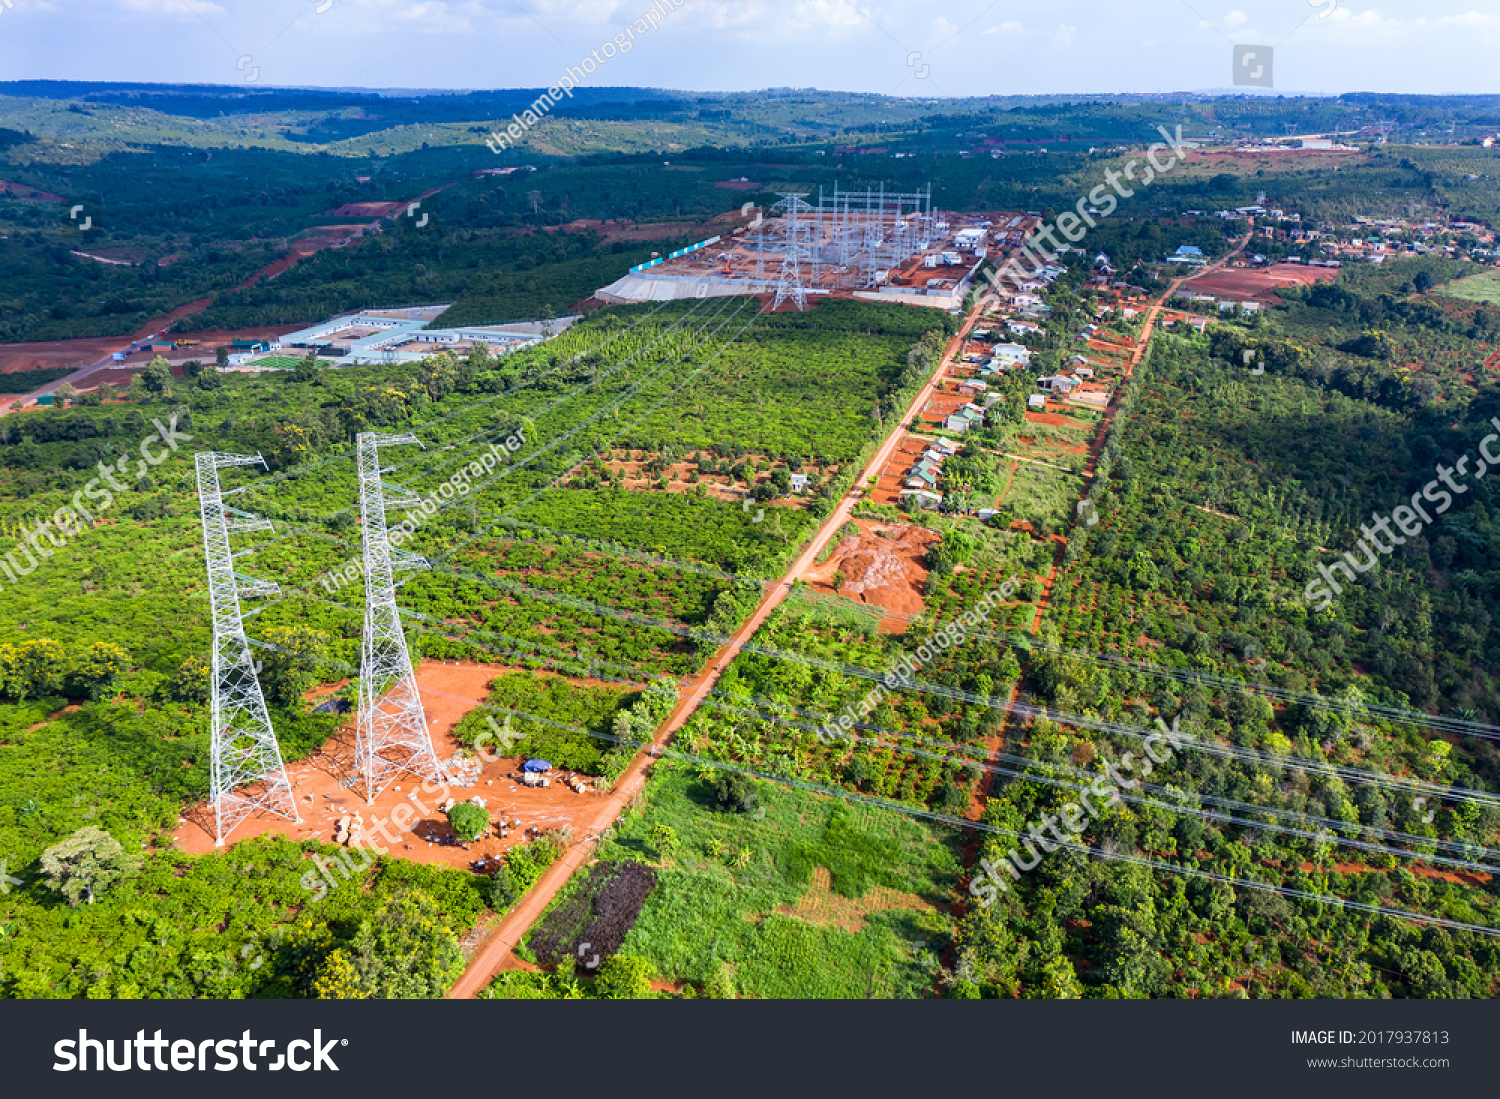 Electricity Pylon - Aerial view of UK standard overhead power line transmission tower under the mountainous area #2017937813